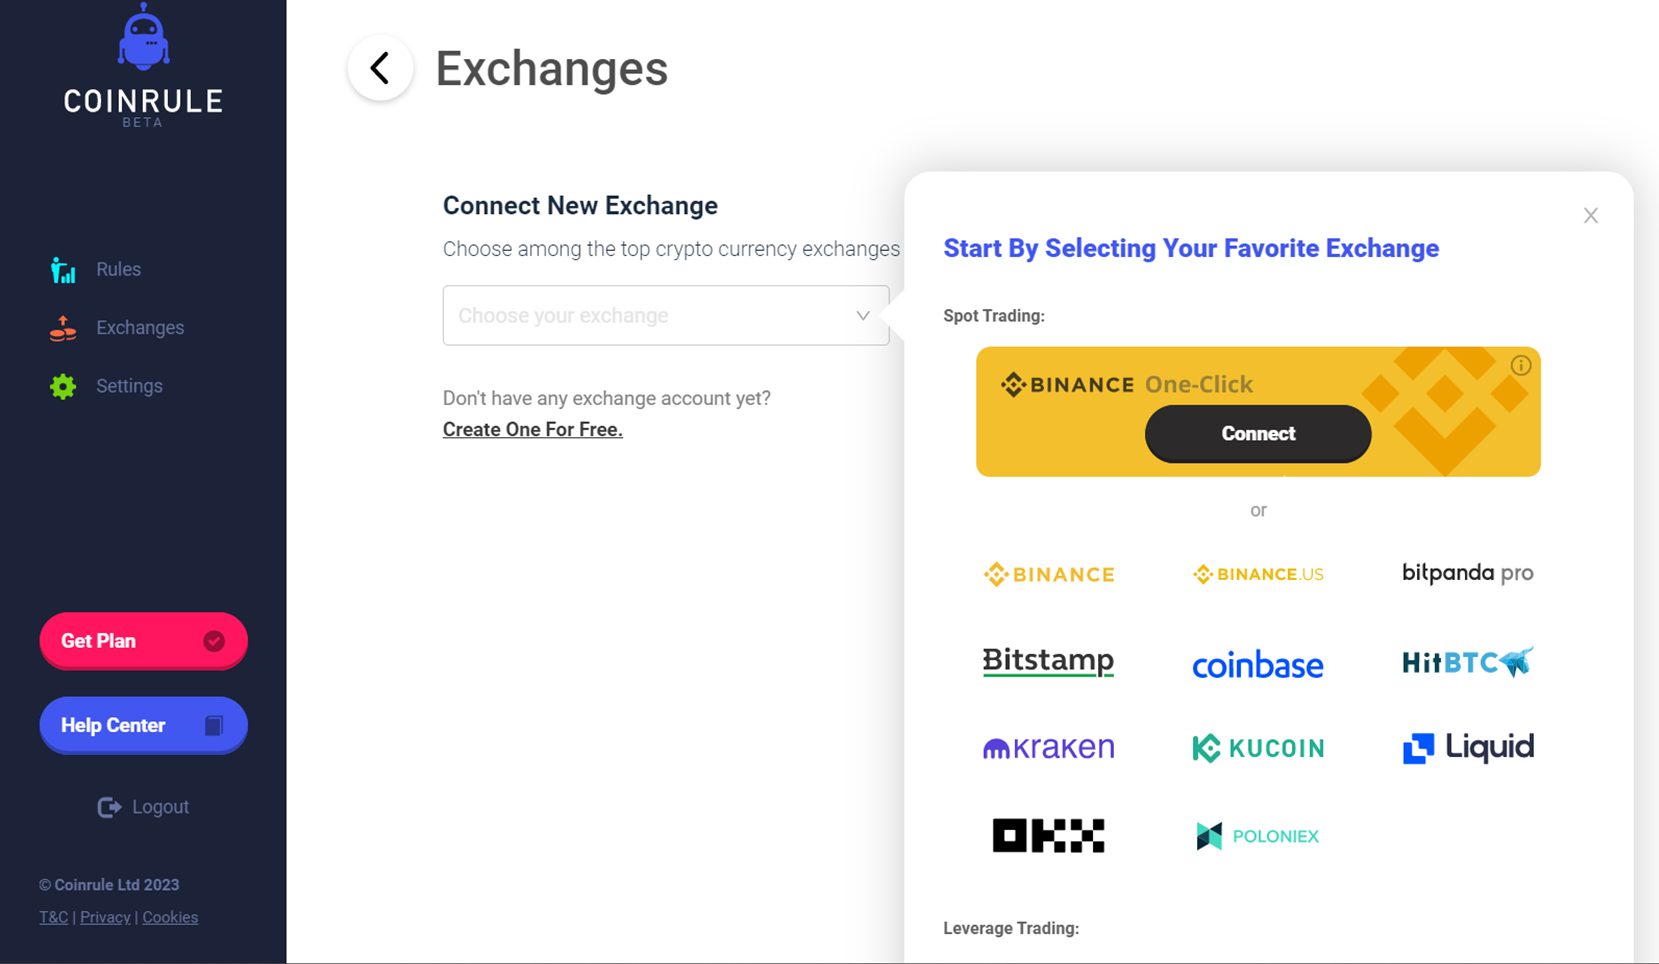 Coinrule exchanges trading bots.